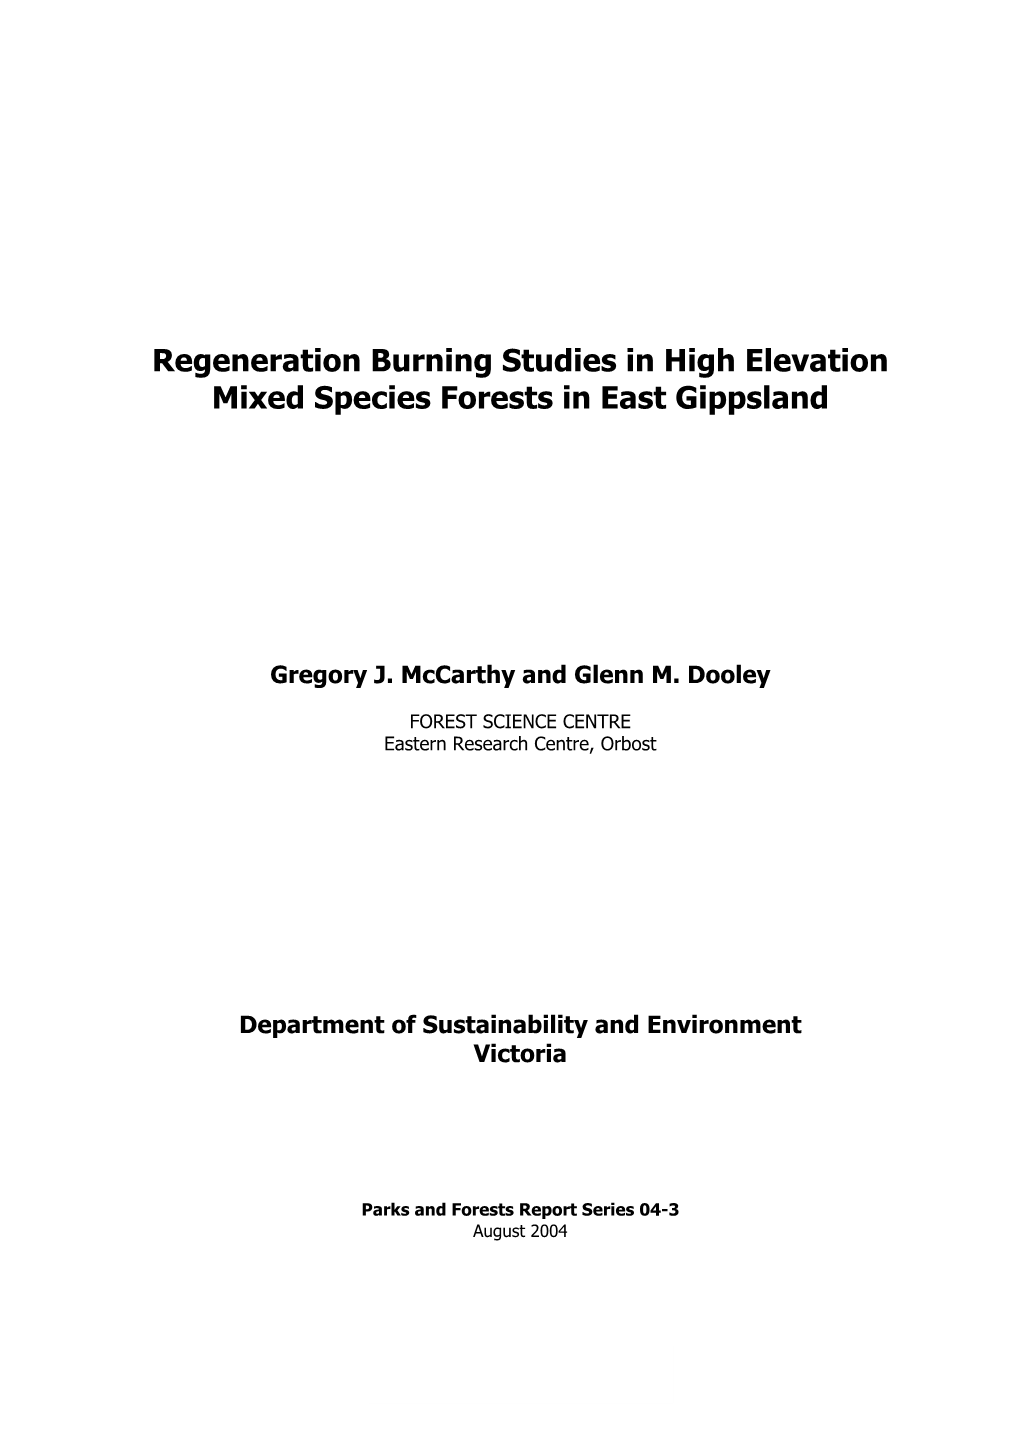 Regeneration Burning Studies in High Elevation Mixed Species Forests in East Gippsland